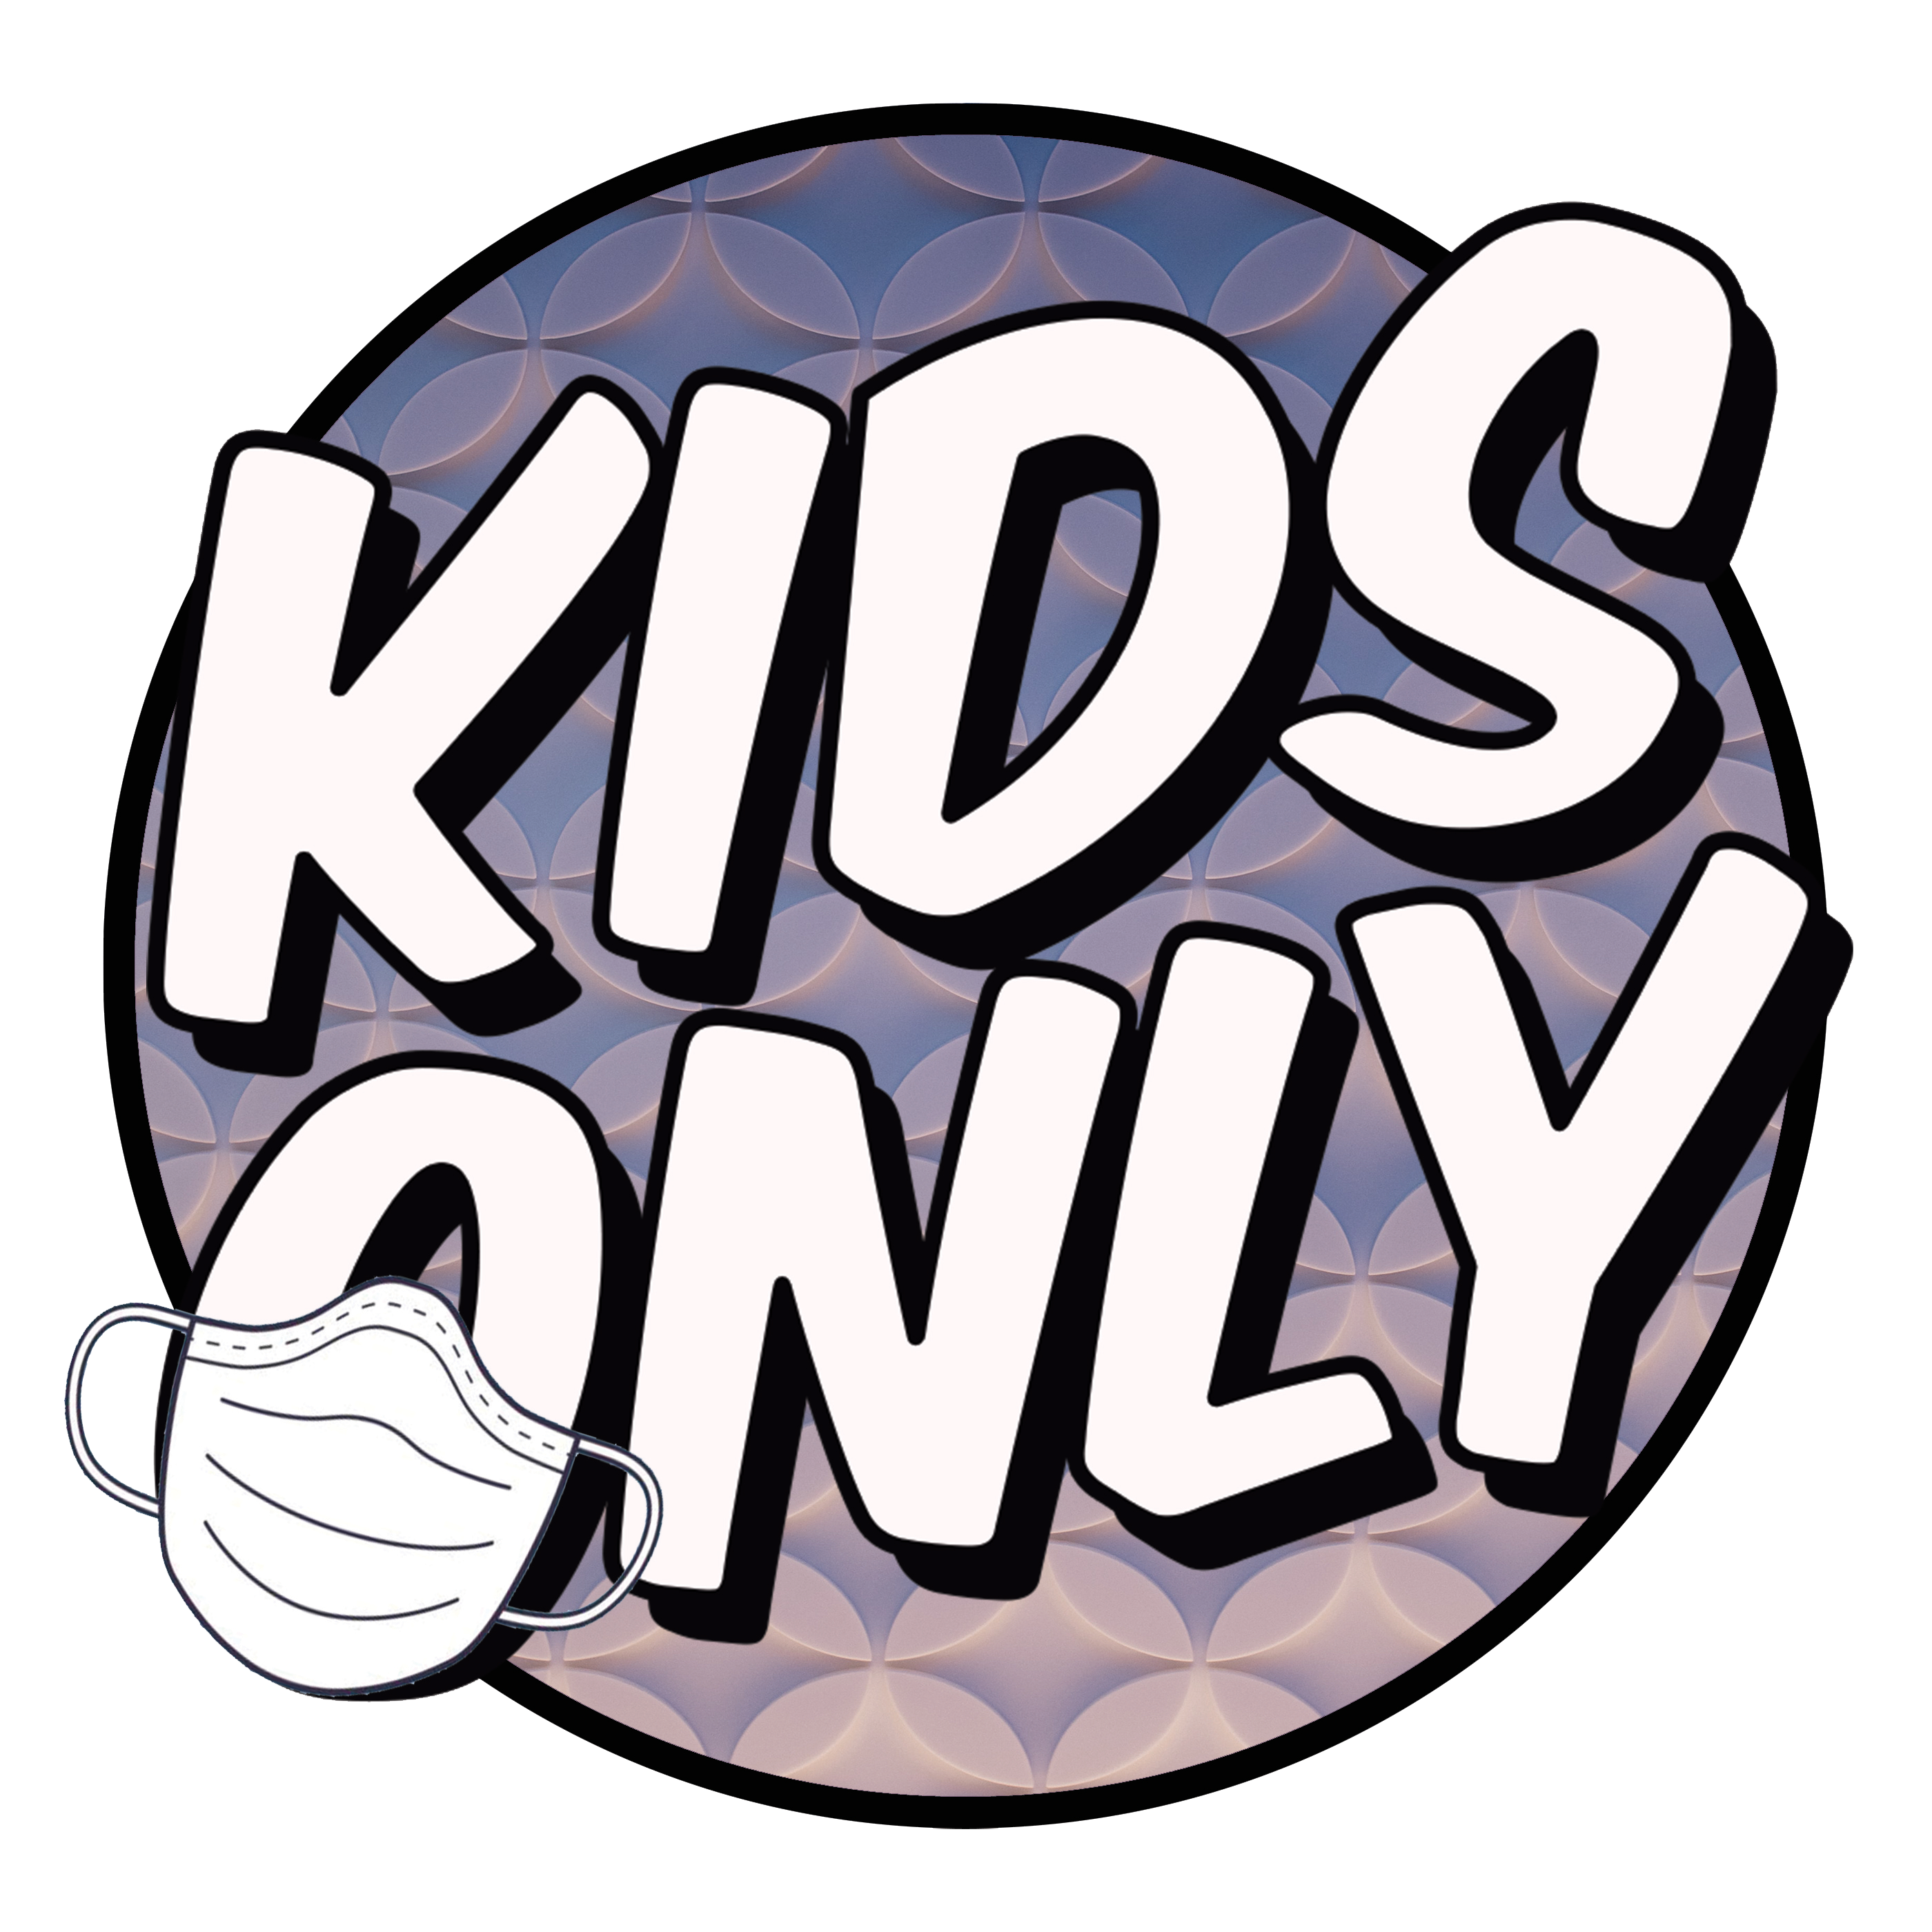 A KIDS ONLY EARLY LEARNING CENTER INC. 4